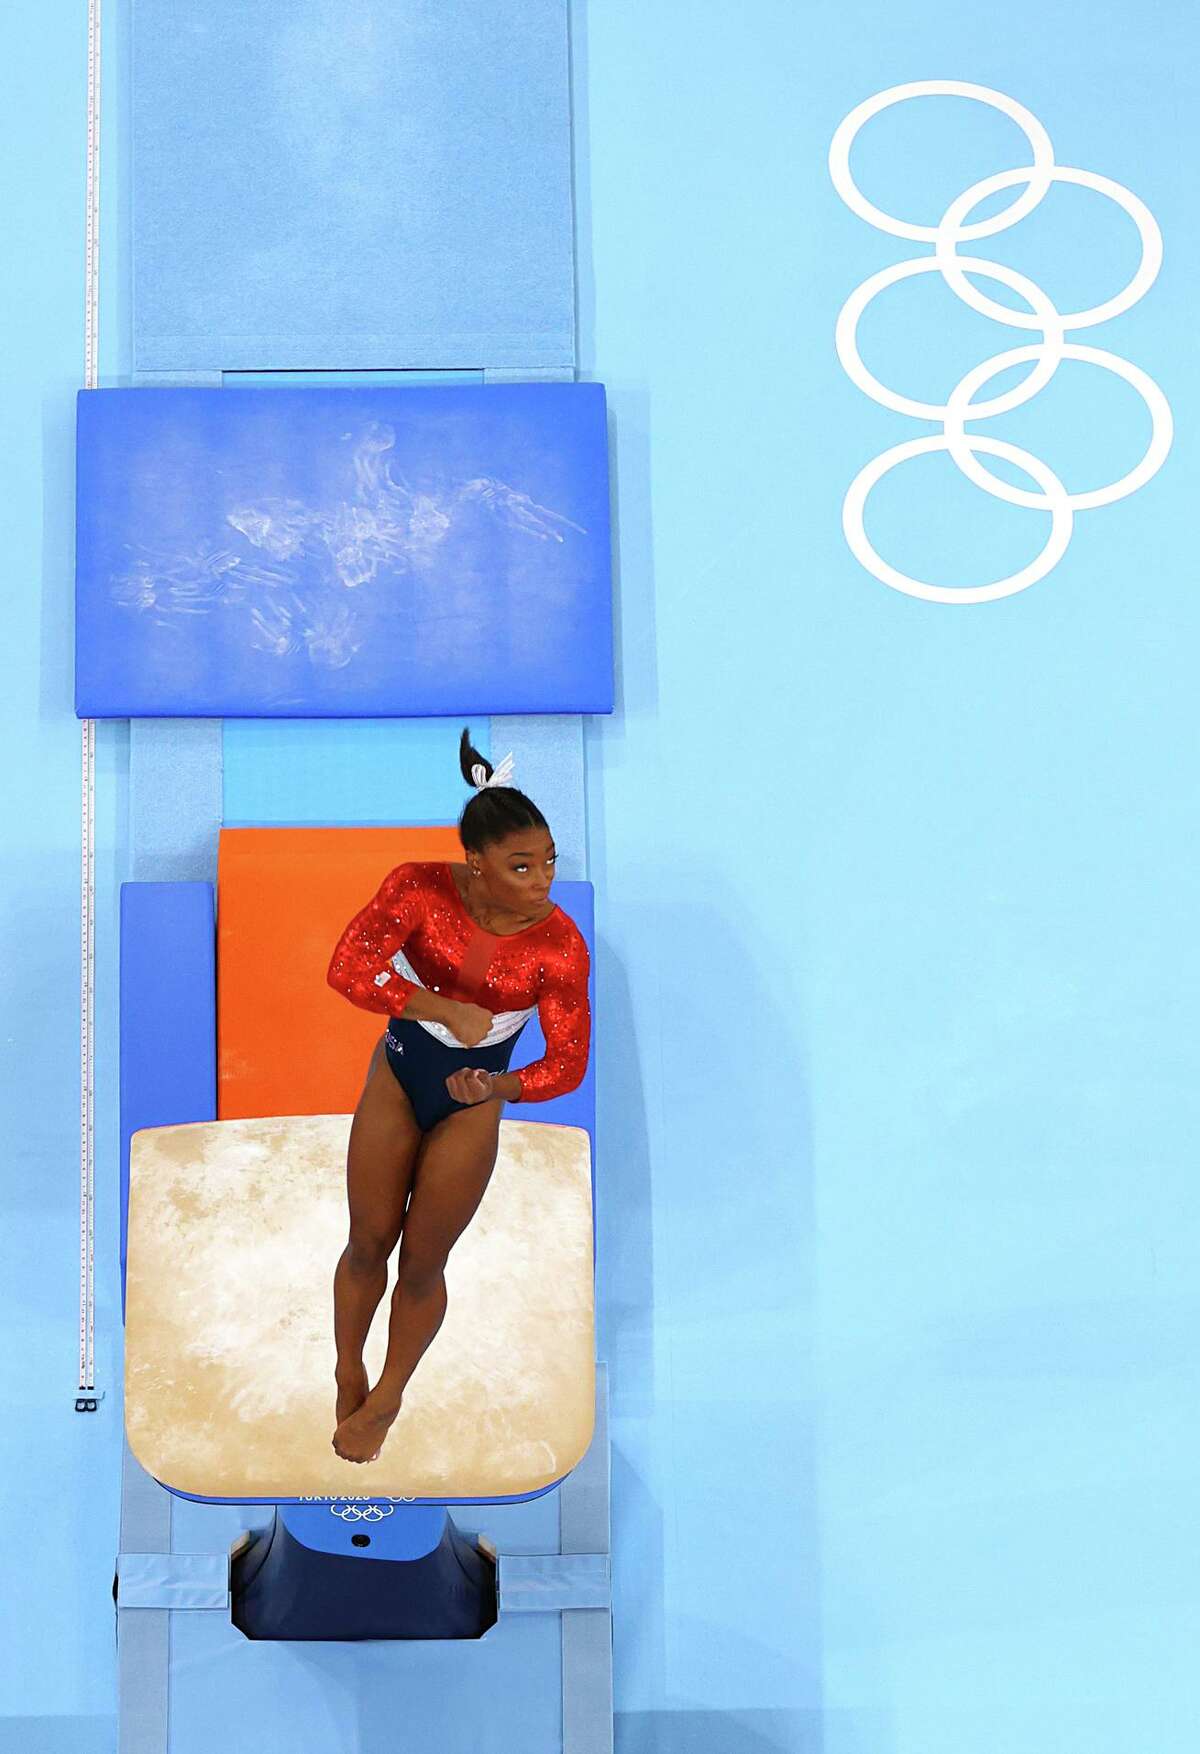 TOKYO, JAPAN - JULY 27: Simone Biles warms up on vault during the Women's Team Final on day four of the Tokyo 2020 Olympic Games at Ariake Gymnastics Centre on July 27, 2021 in Tokyo, Japan. (Photo by Laurence Griffiths/Getty Images)